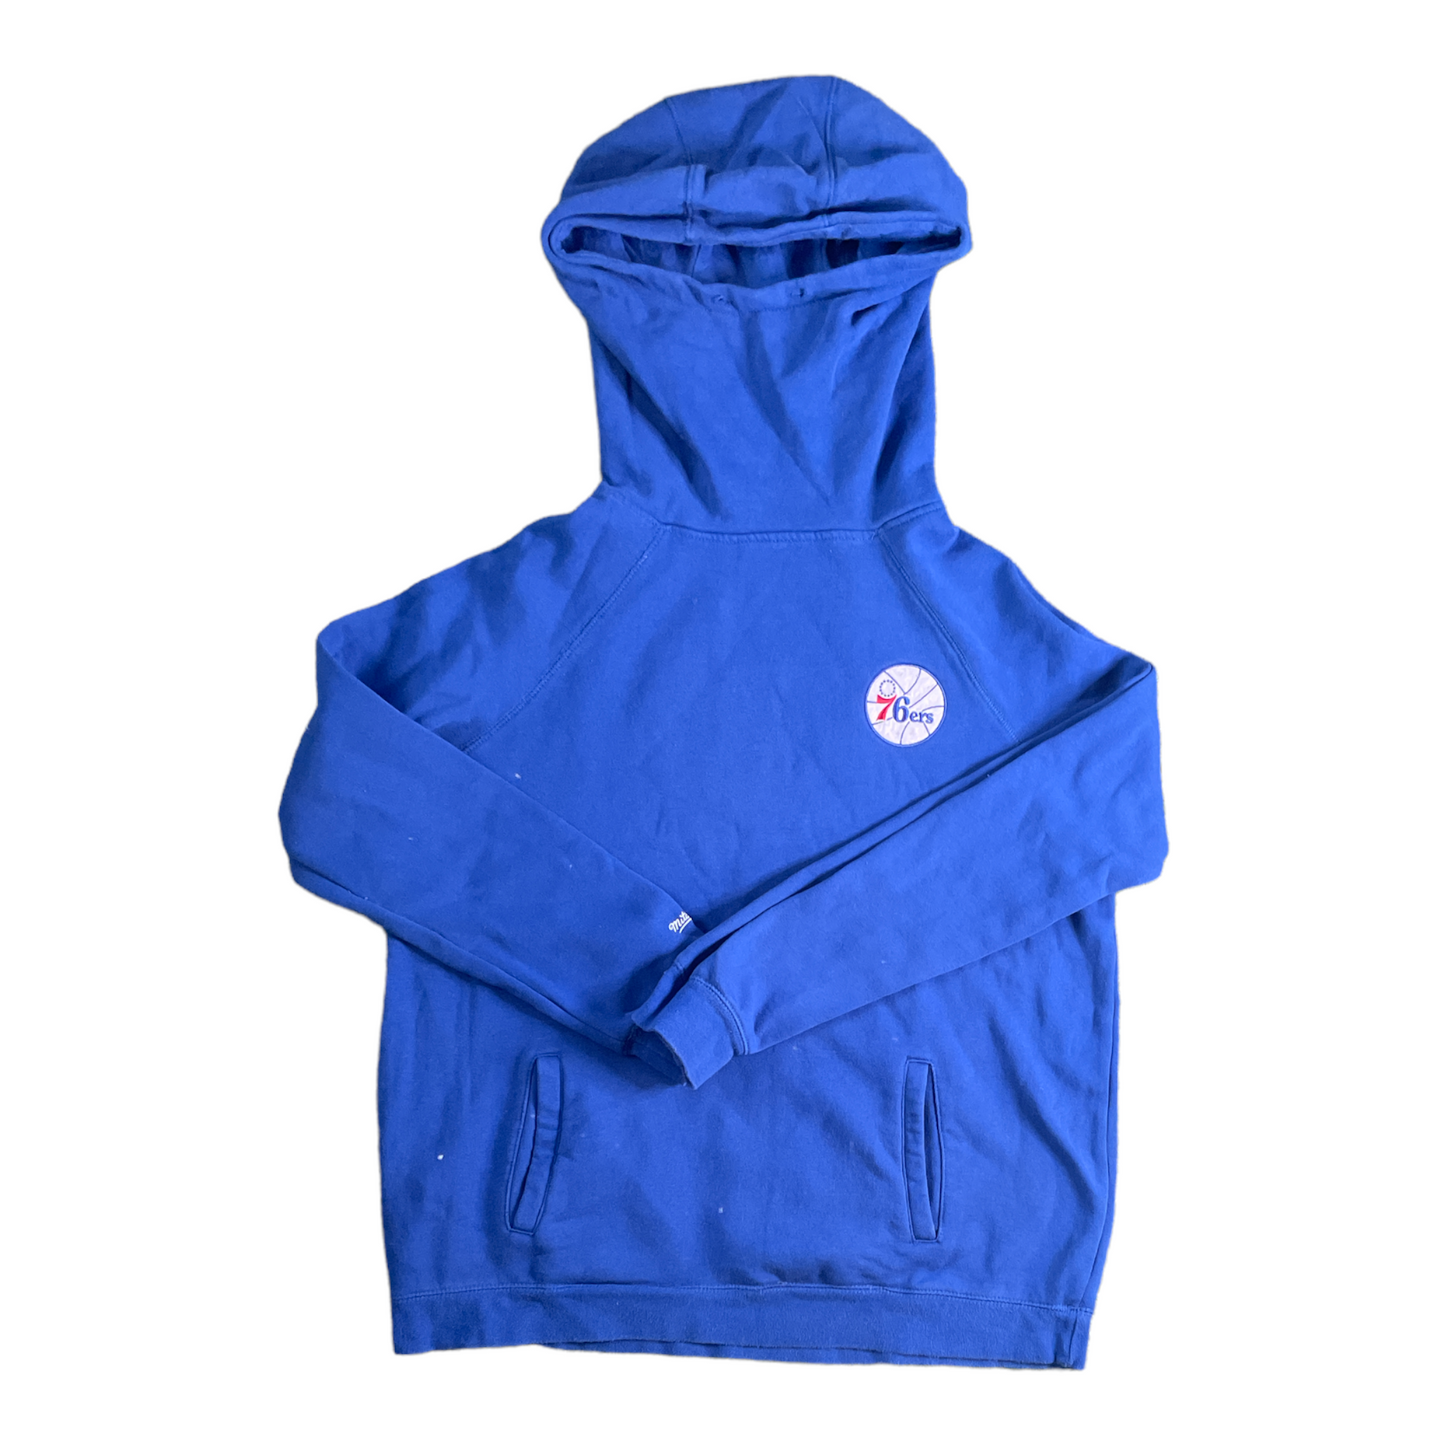 Mitchell and Ness 76ers Warmup Hoodie L